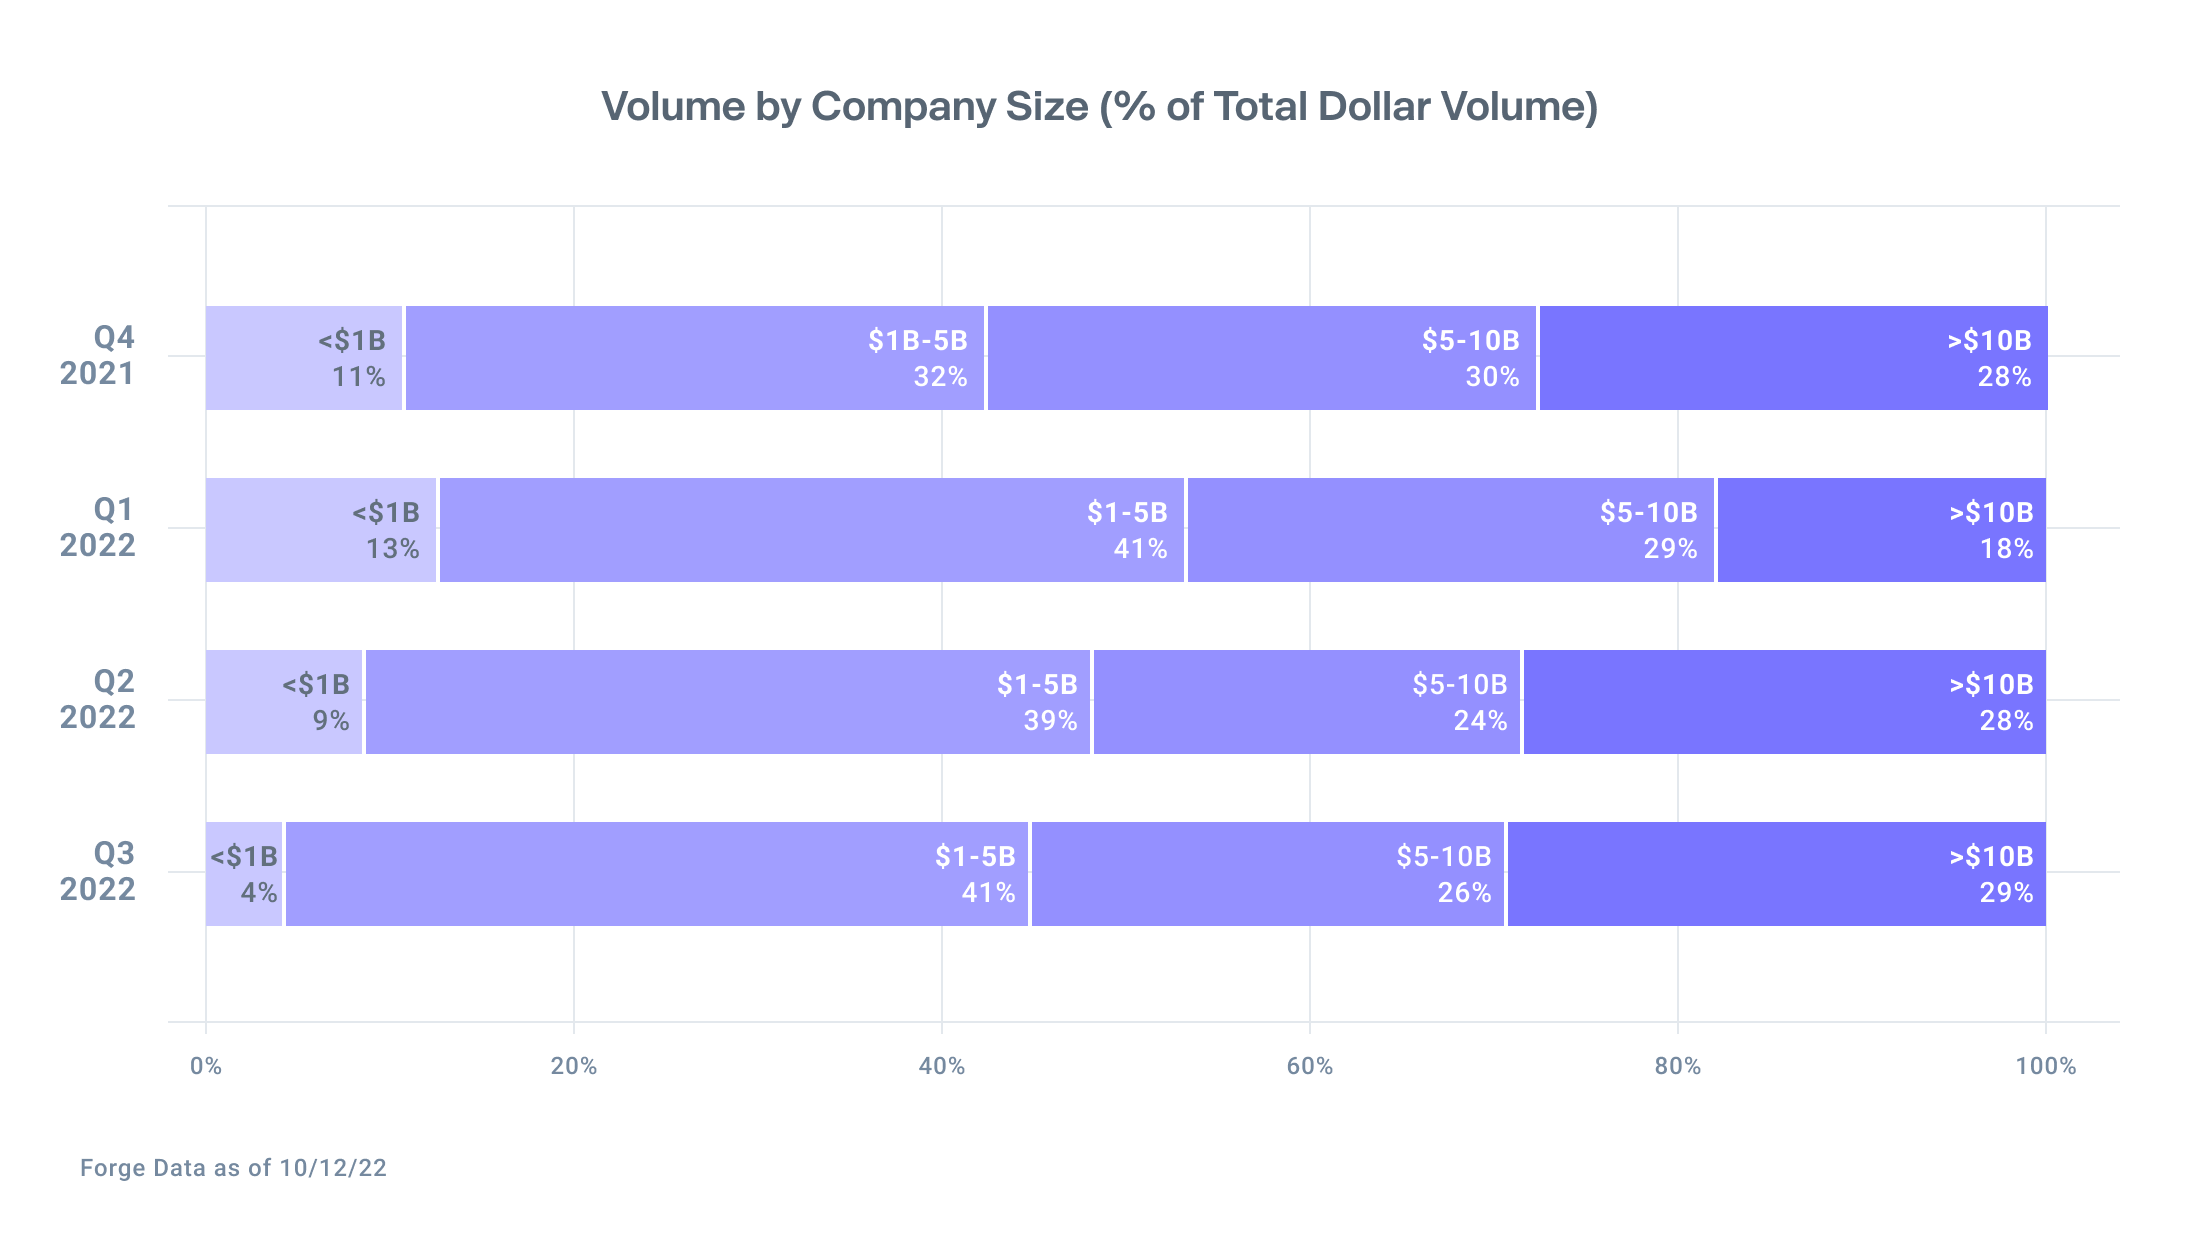 Private Market Investors Continue to Invest in Companies with a $1-5B Valuation